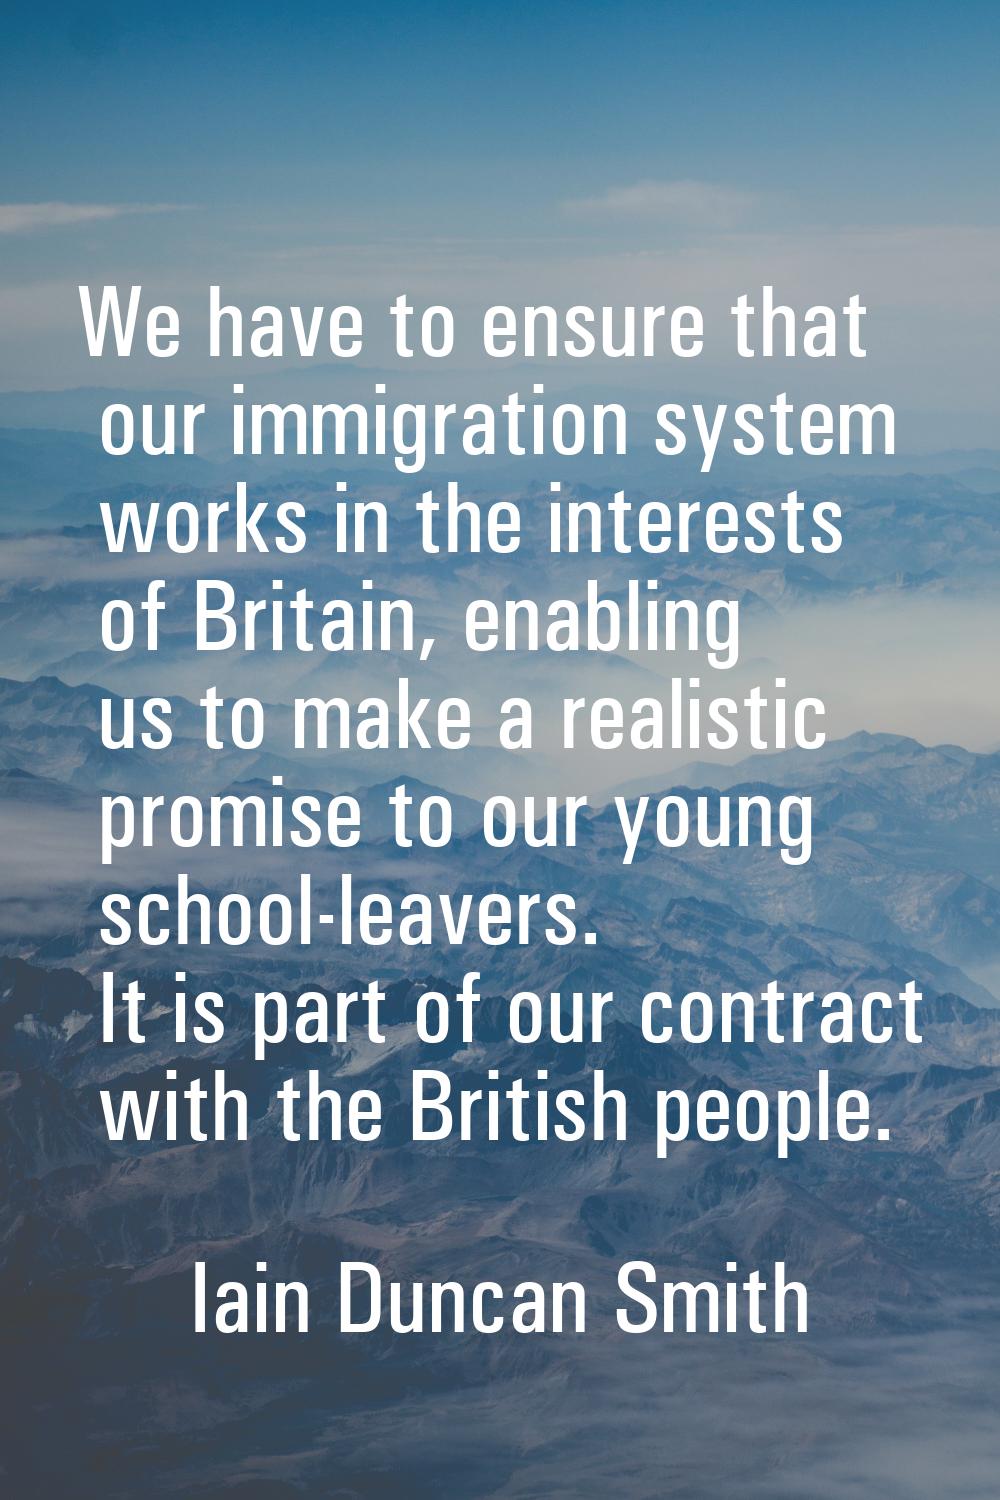 We have to ensure that our immigration system works in the interests of Britain, enabling us to mak